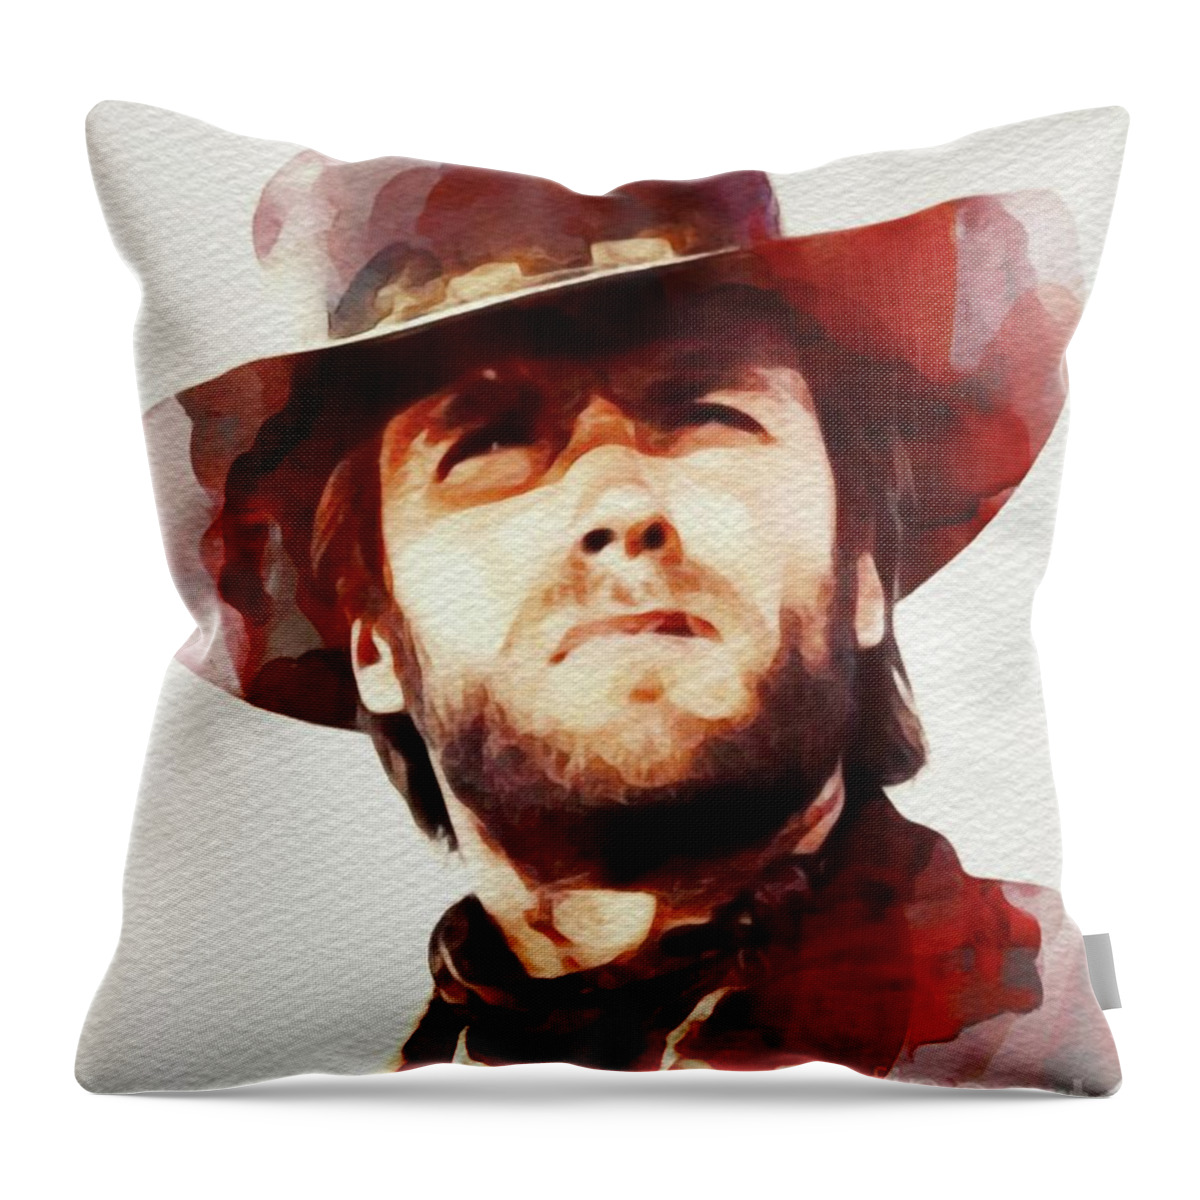 Clint Throw Pillow featuring the painting Clint Eastwood, Hollywood Legend #2 by Esoterica Art Agency